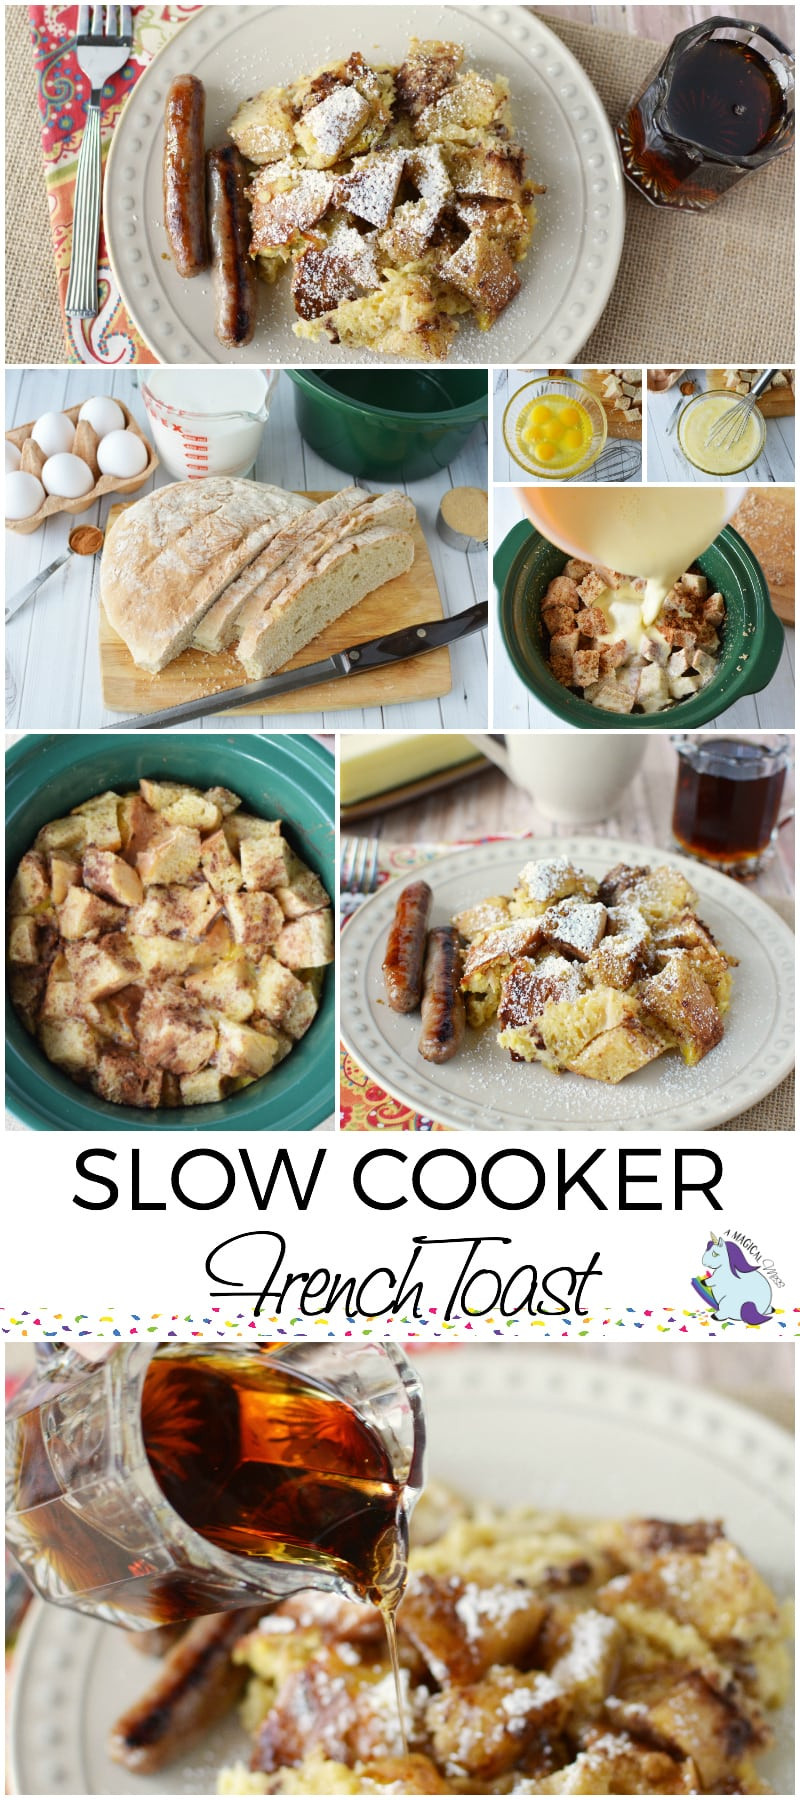 Slow Cooker French Toast Overnight
 Delicious Overnight Slow Cooker French Toast Recipe A